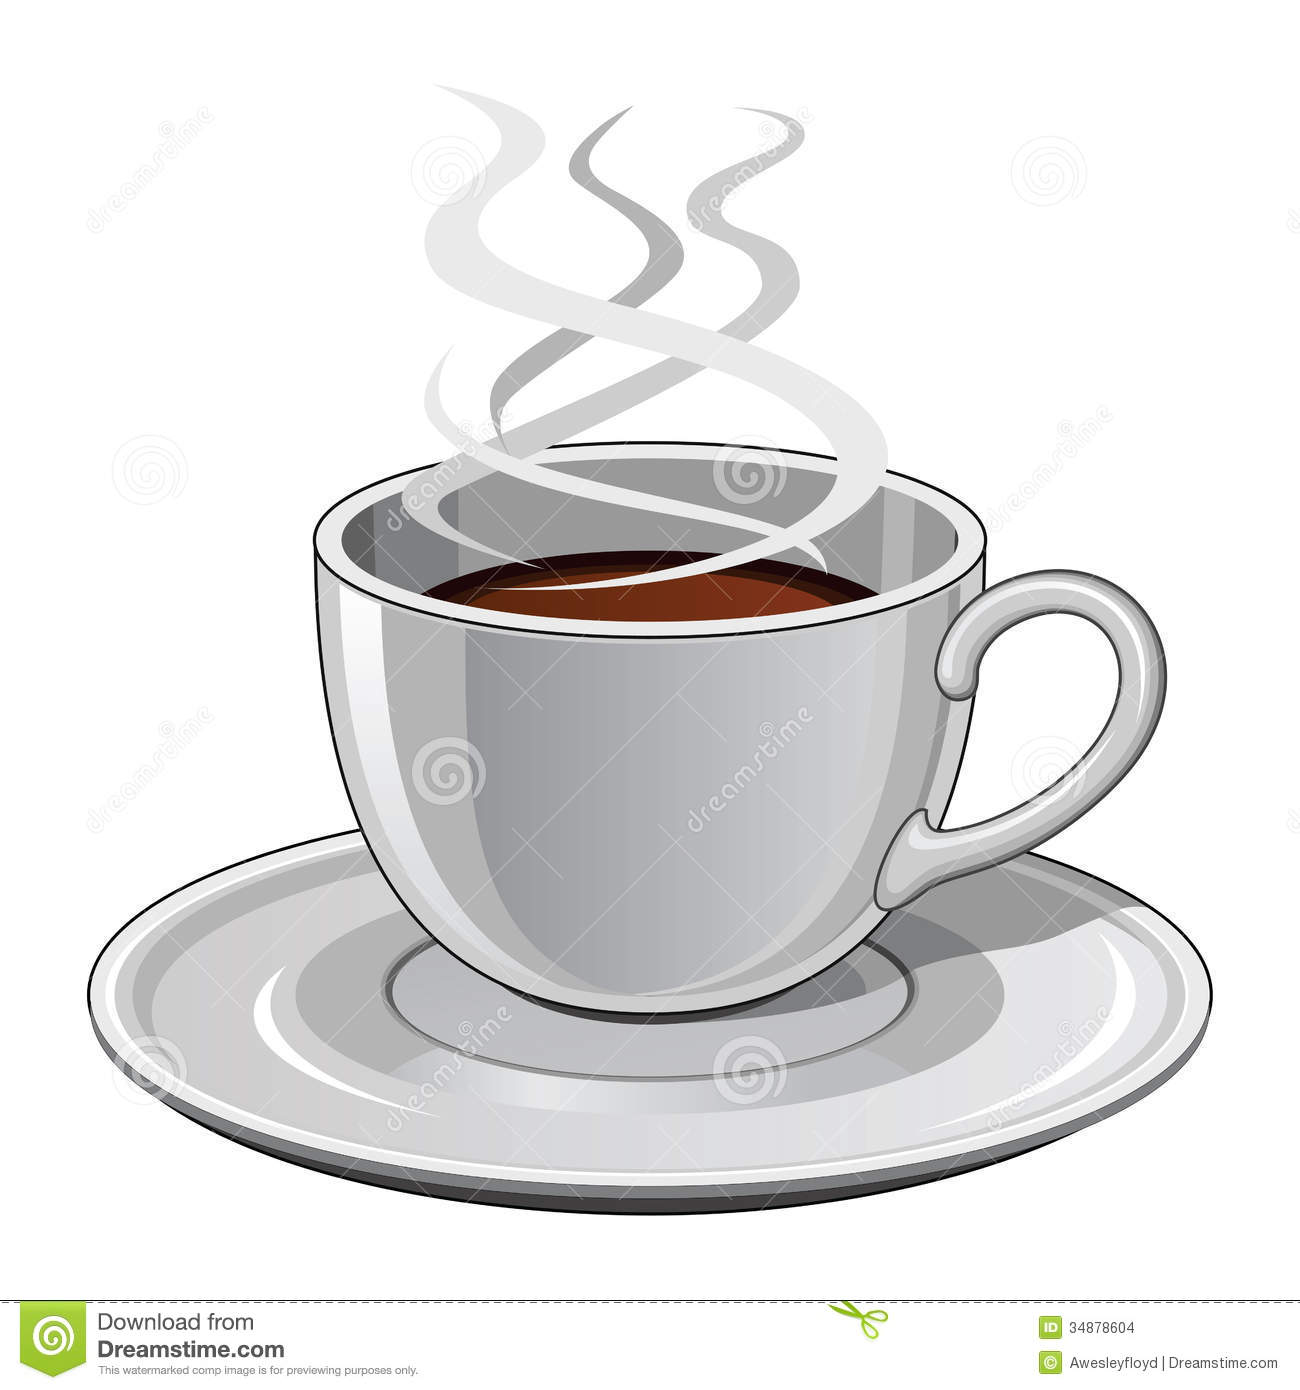 Illustration Of A Hot Steaming Cup Of Coffee  Includes Cup And Saucer